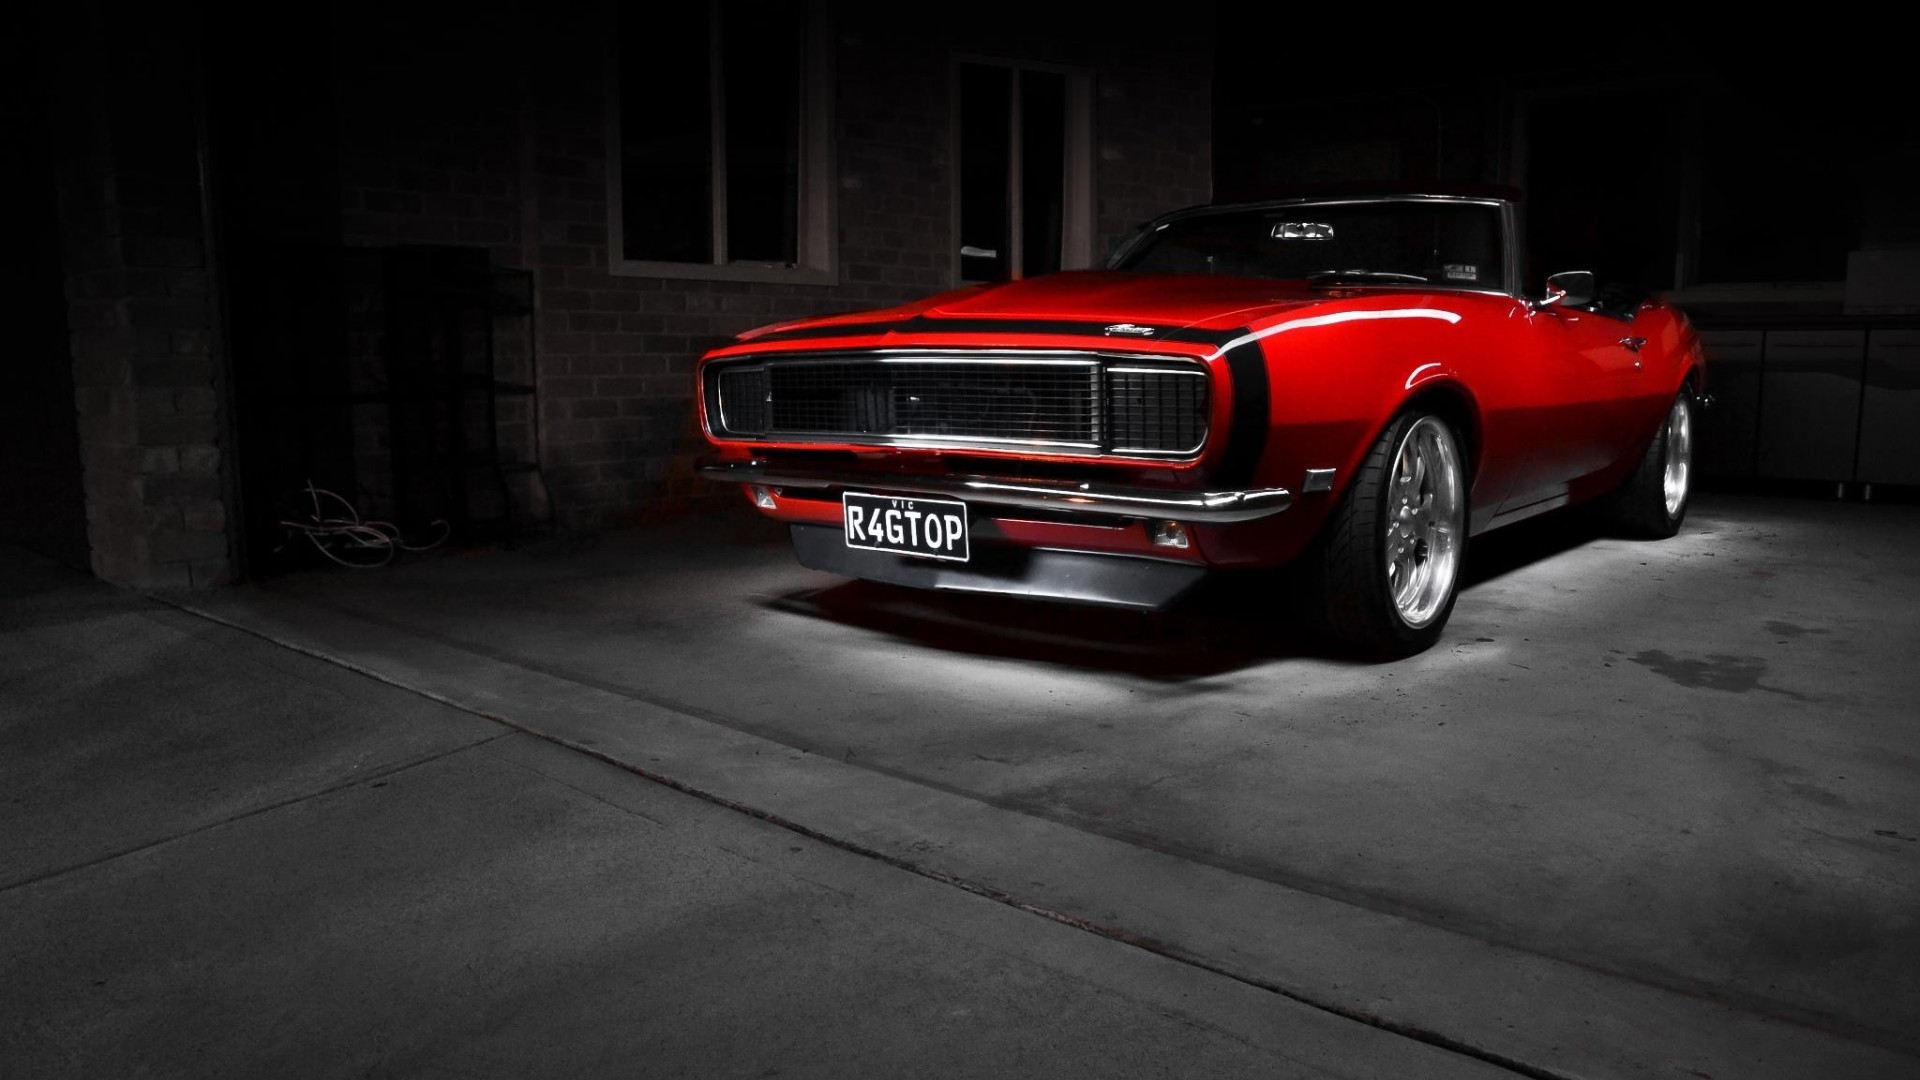 Muscle Car Wallpaper 1920x1080 70+ images